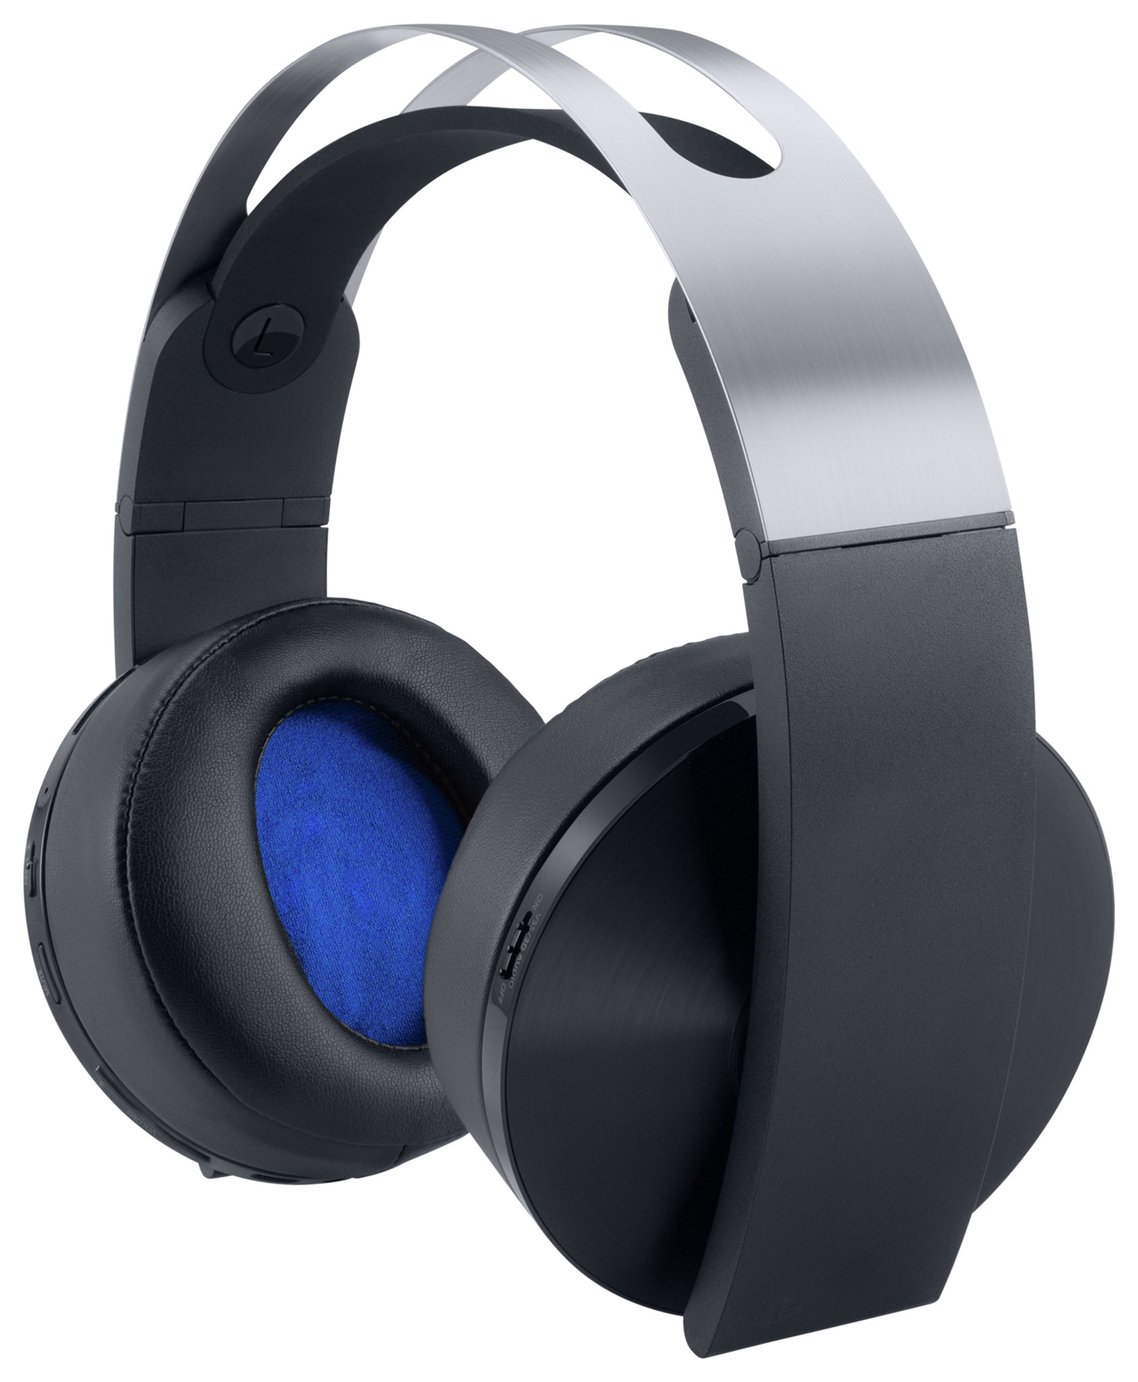 Sony Wireless PS4 Headset Review